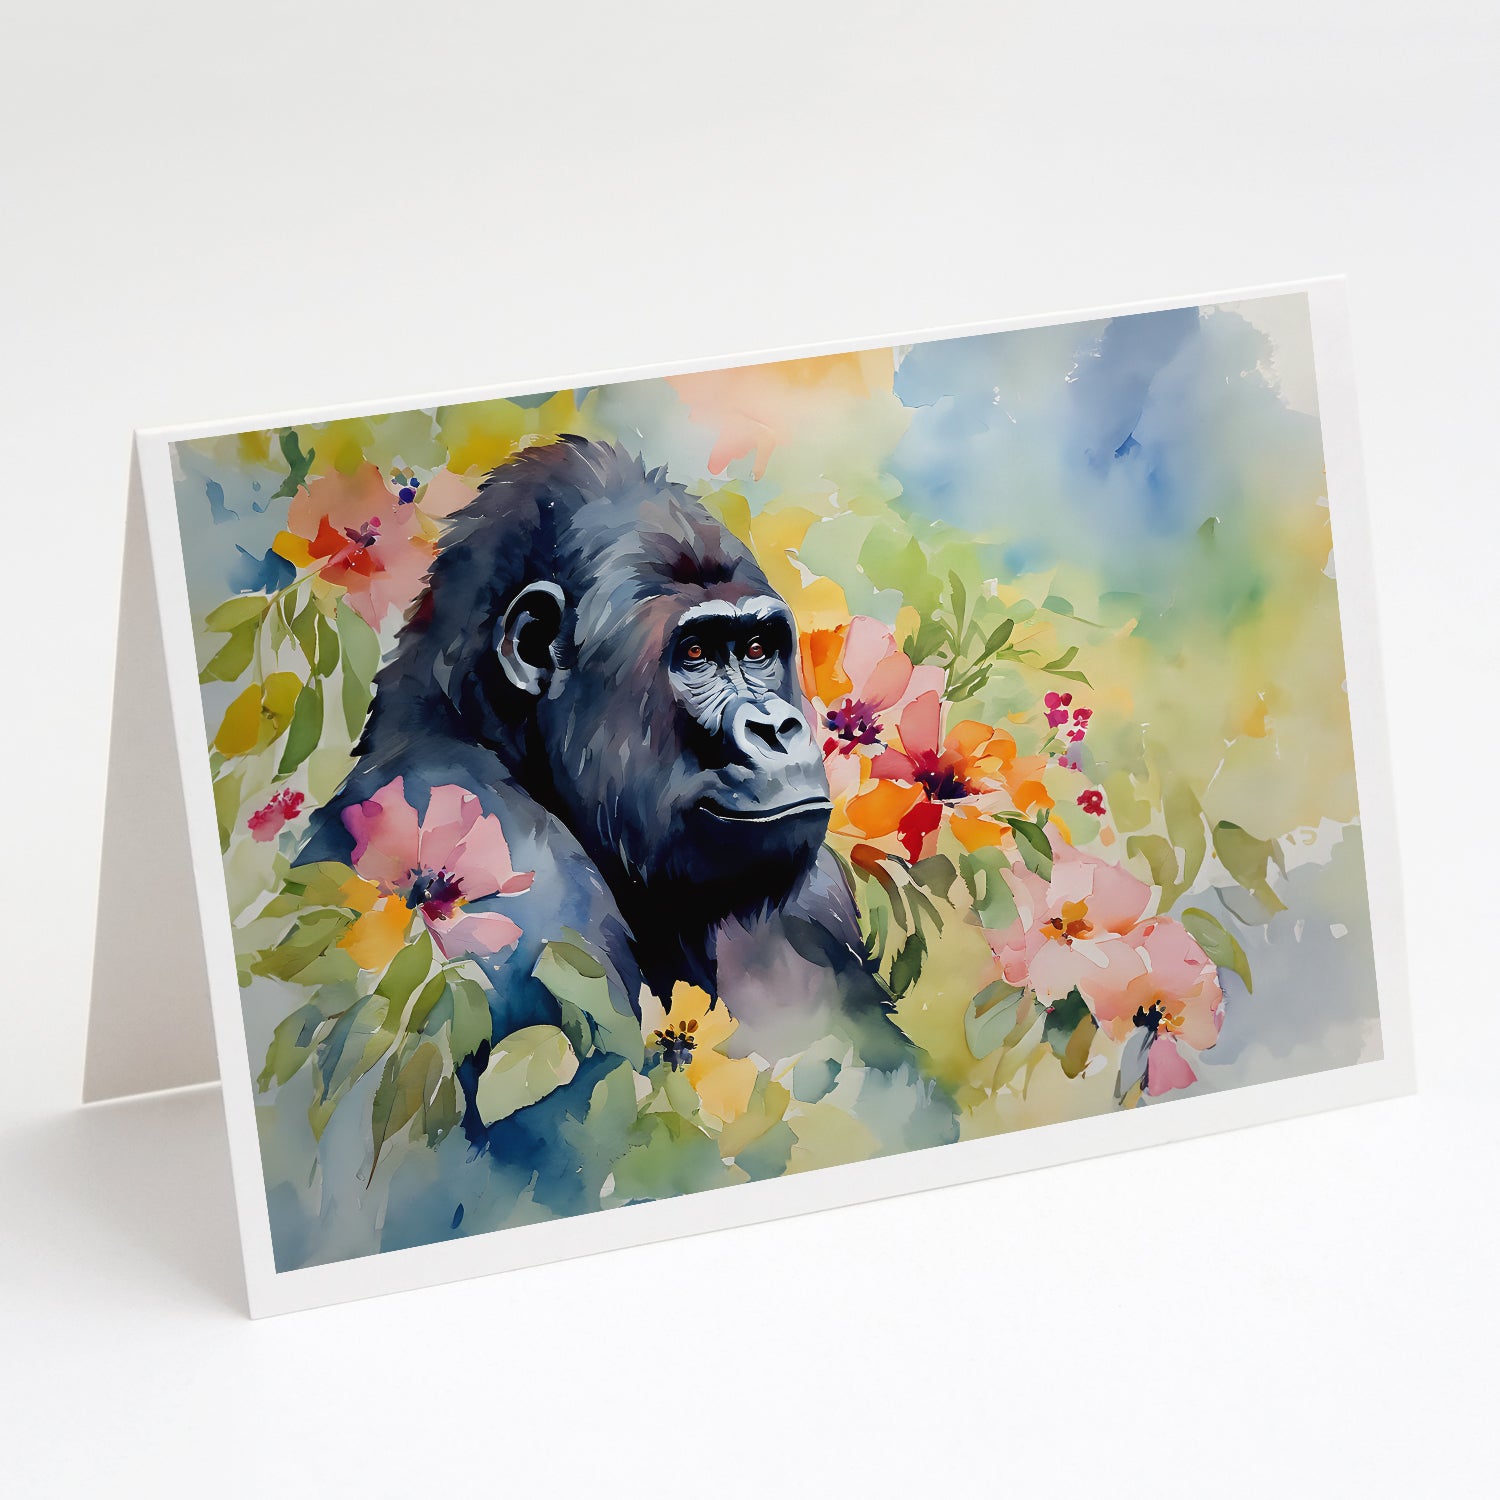 Buy this Gorilla Greeting Cards Pack of 8